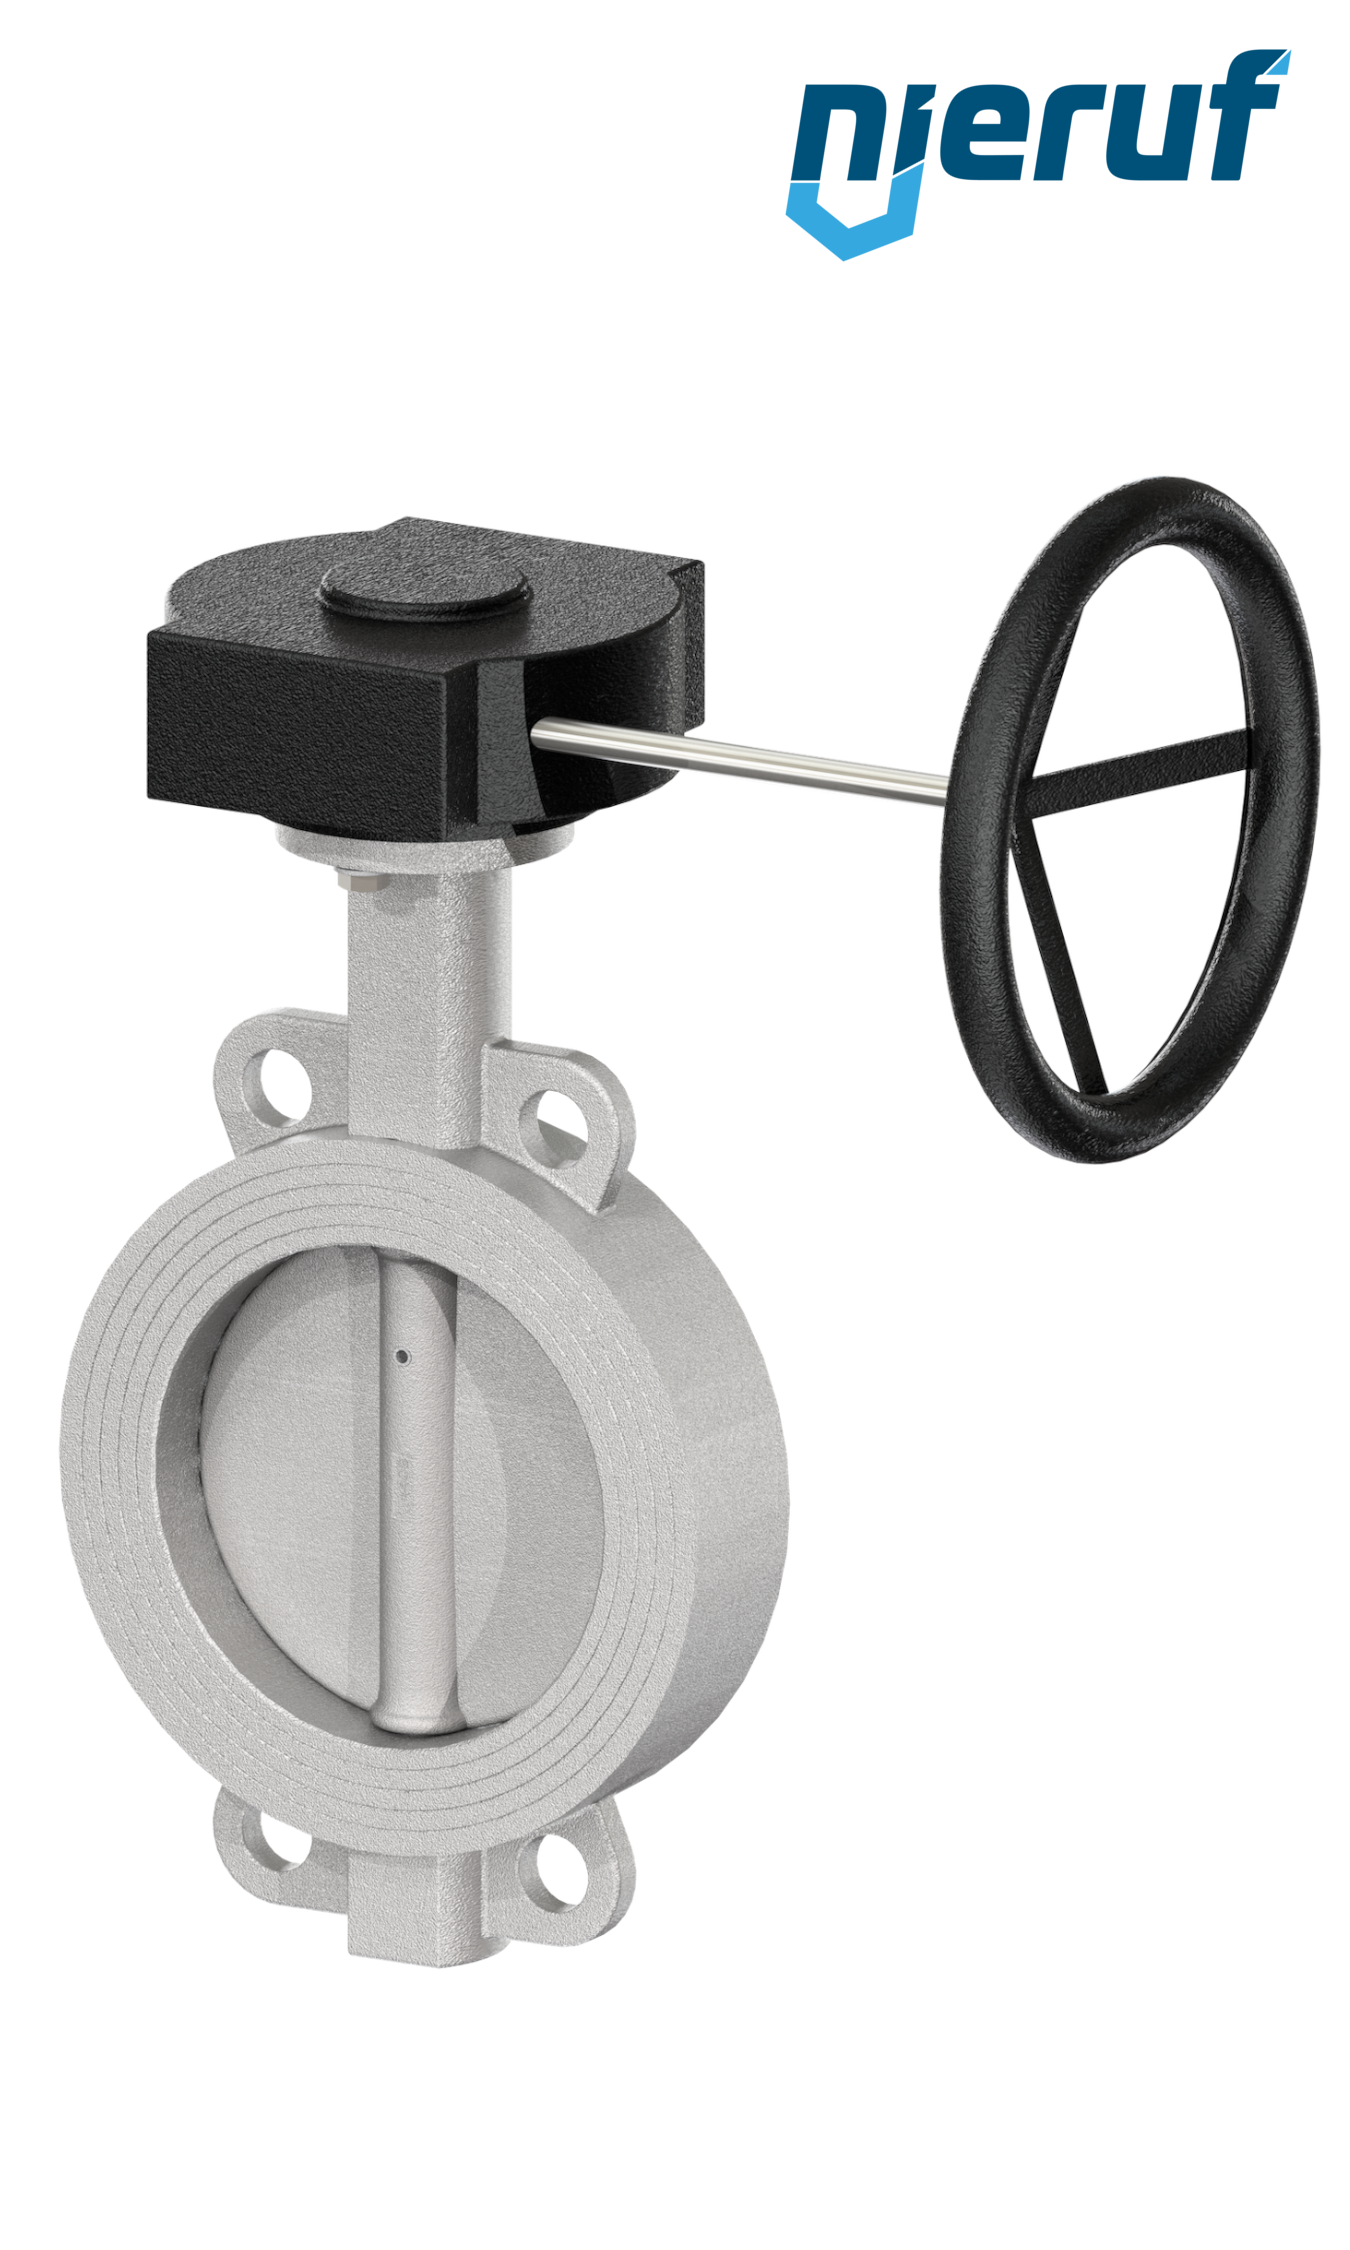 Butterfly-valve-stainless-steel DN300 PN16 AK08 metall gearbox